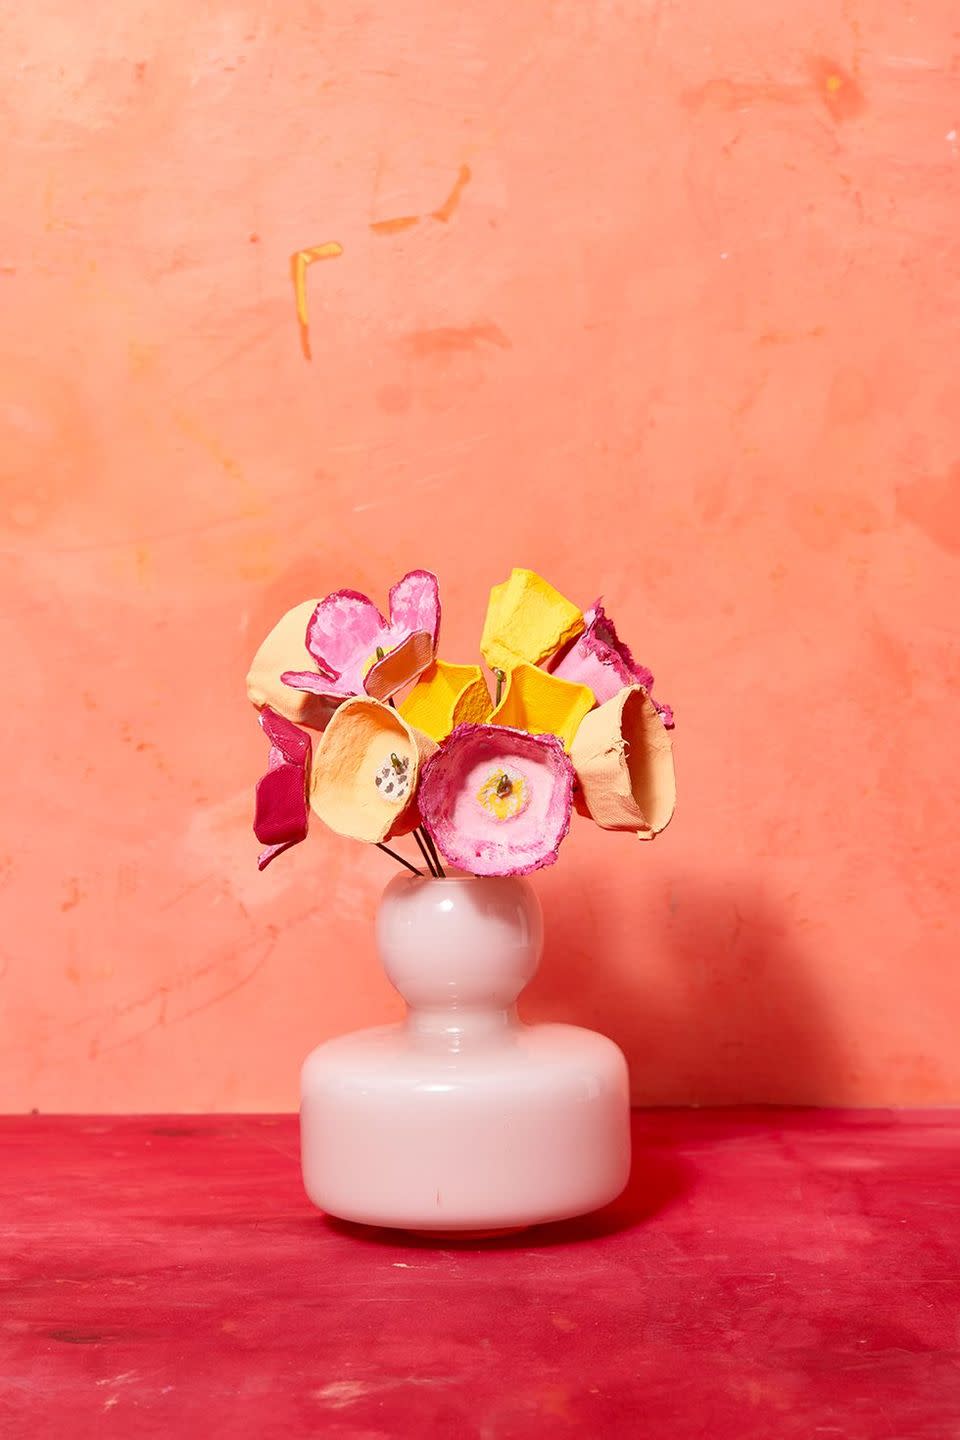 <p>Assemble a bouquet of egg carton flowers that she can enjoy well beyond Mother's Day. Our advice: Have the adults cut out the "flowers" first and let kids get creative with paint!</p><p><strong>Follow these step-by-step instructions:</strong></p><ol><li>Cut off the top of the egg carton and the extra flap on the other edge.</li><li>Cut out the center columns from the carton by making small cuts with your X-Acto knife.</li><li>Cut out what is left on the carton to use as egg cups.</li><li>Using the center columns you cut out, clean up the edge of the opening with your scissors.</li><li>Paint the columns both inside and out with some thinned out acrylic paint for a washed look.</li><li>Using the egg cups, cut around the top of the cup to make it the same size all around or rip the top edge with your fingers to get a more rough look.</li><li>Paint the cup with your thinned out acrylic paint for a flower look.</li><li>For a petaled look, cut down the 4 corners of the cup and clean up using your scissors and rounding the tops of each petal before painting.</li><li>Keep the stem in place by attaching floral wire to the middle. Use the wire cutters to hold them.</li></ol>